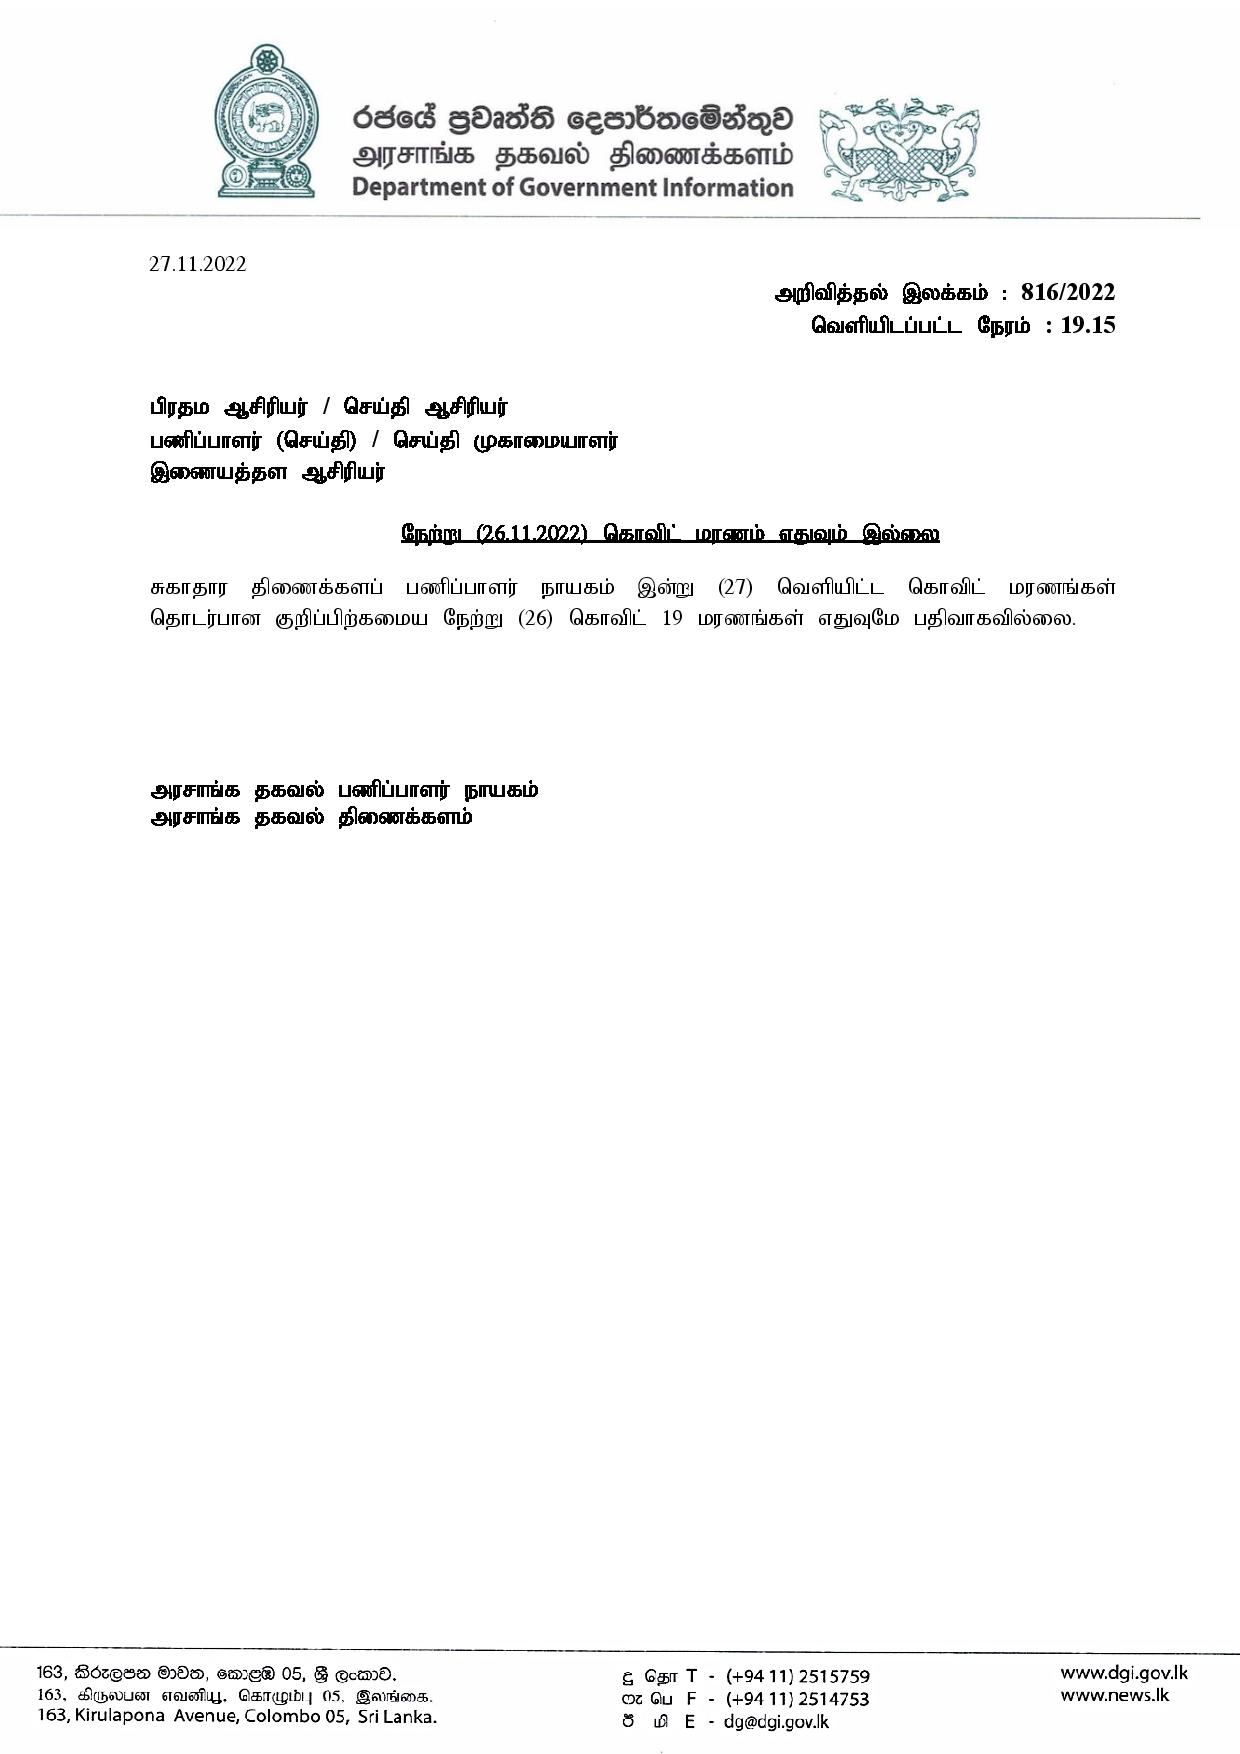 Release No 816 Tamil page 001